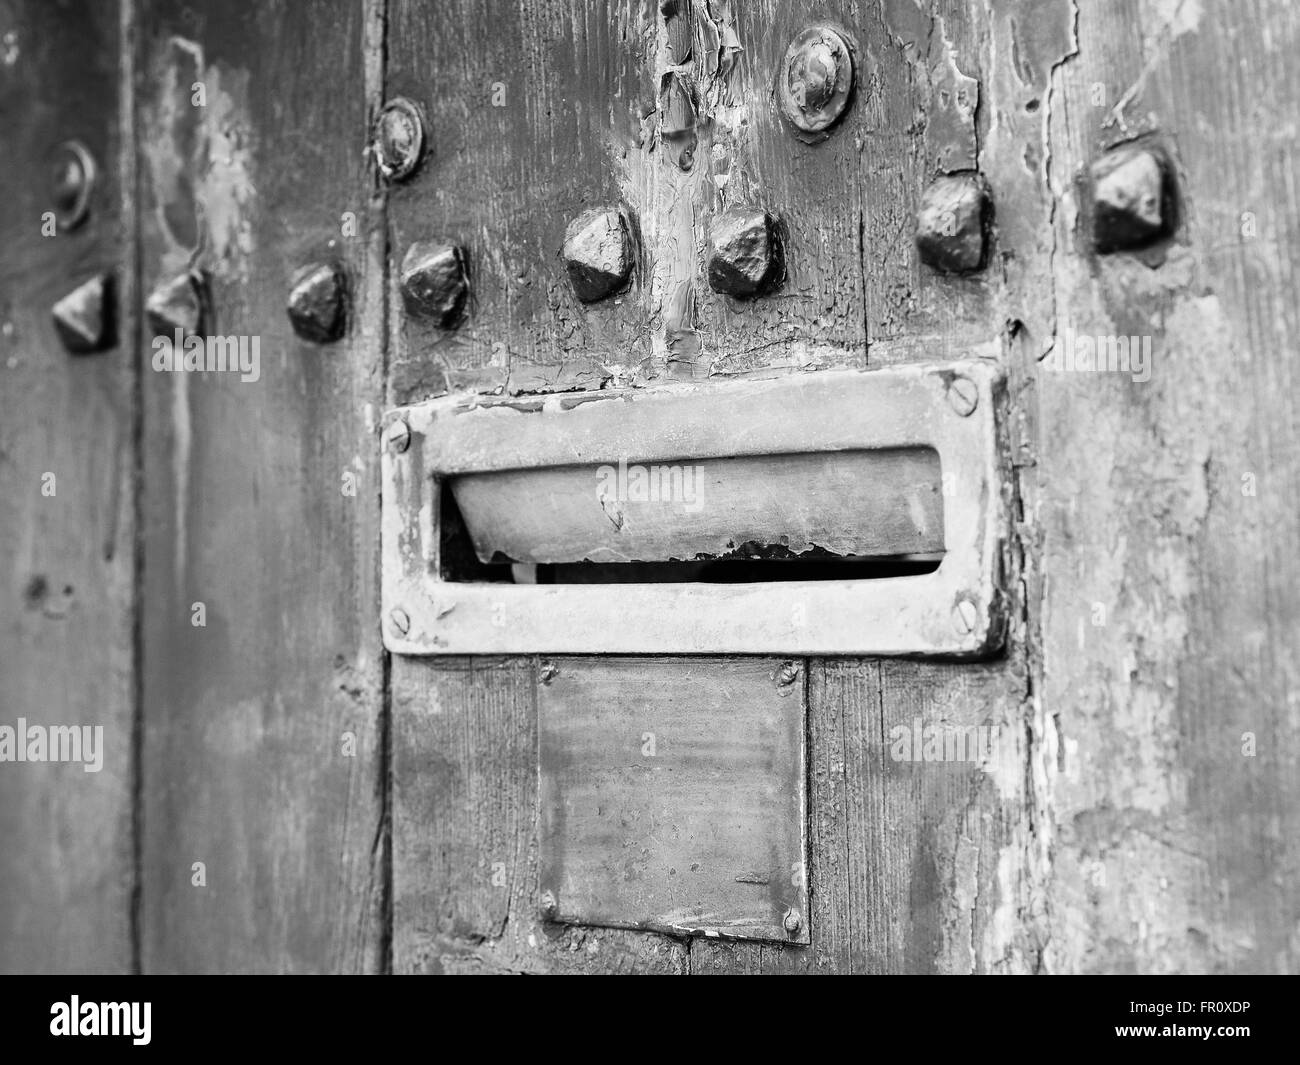 Ancient rusty iron letterbox opened on wooden door with metal ornaments, black and white conversion, intentionally blurred. Stock Photo